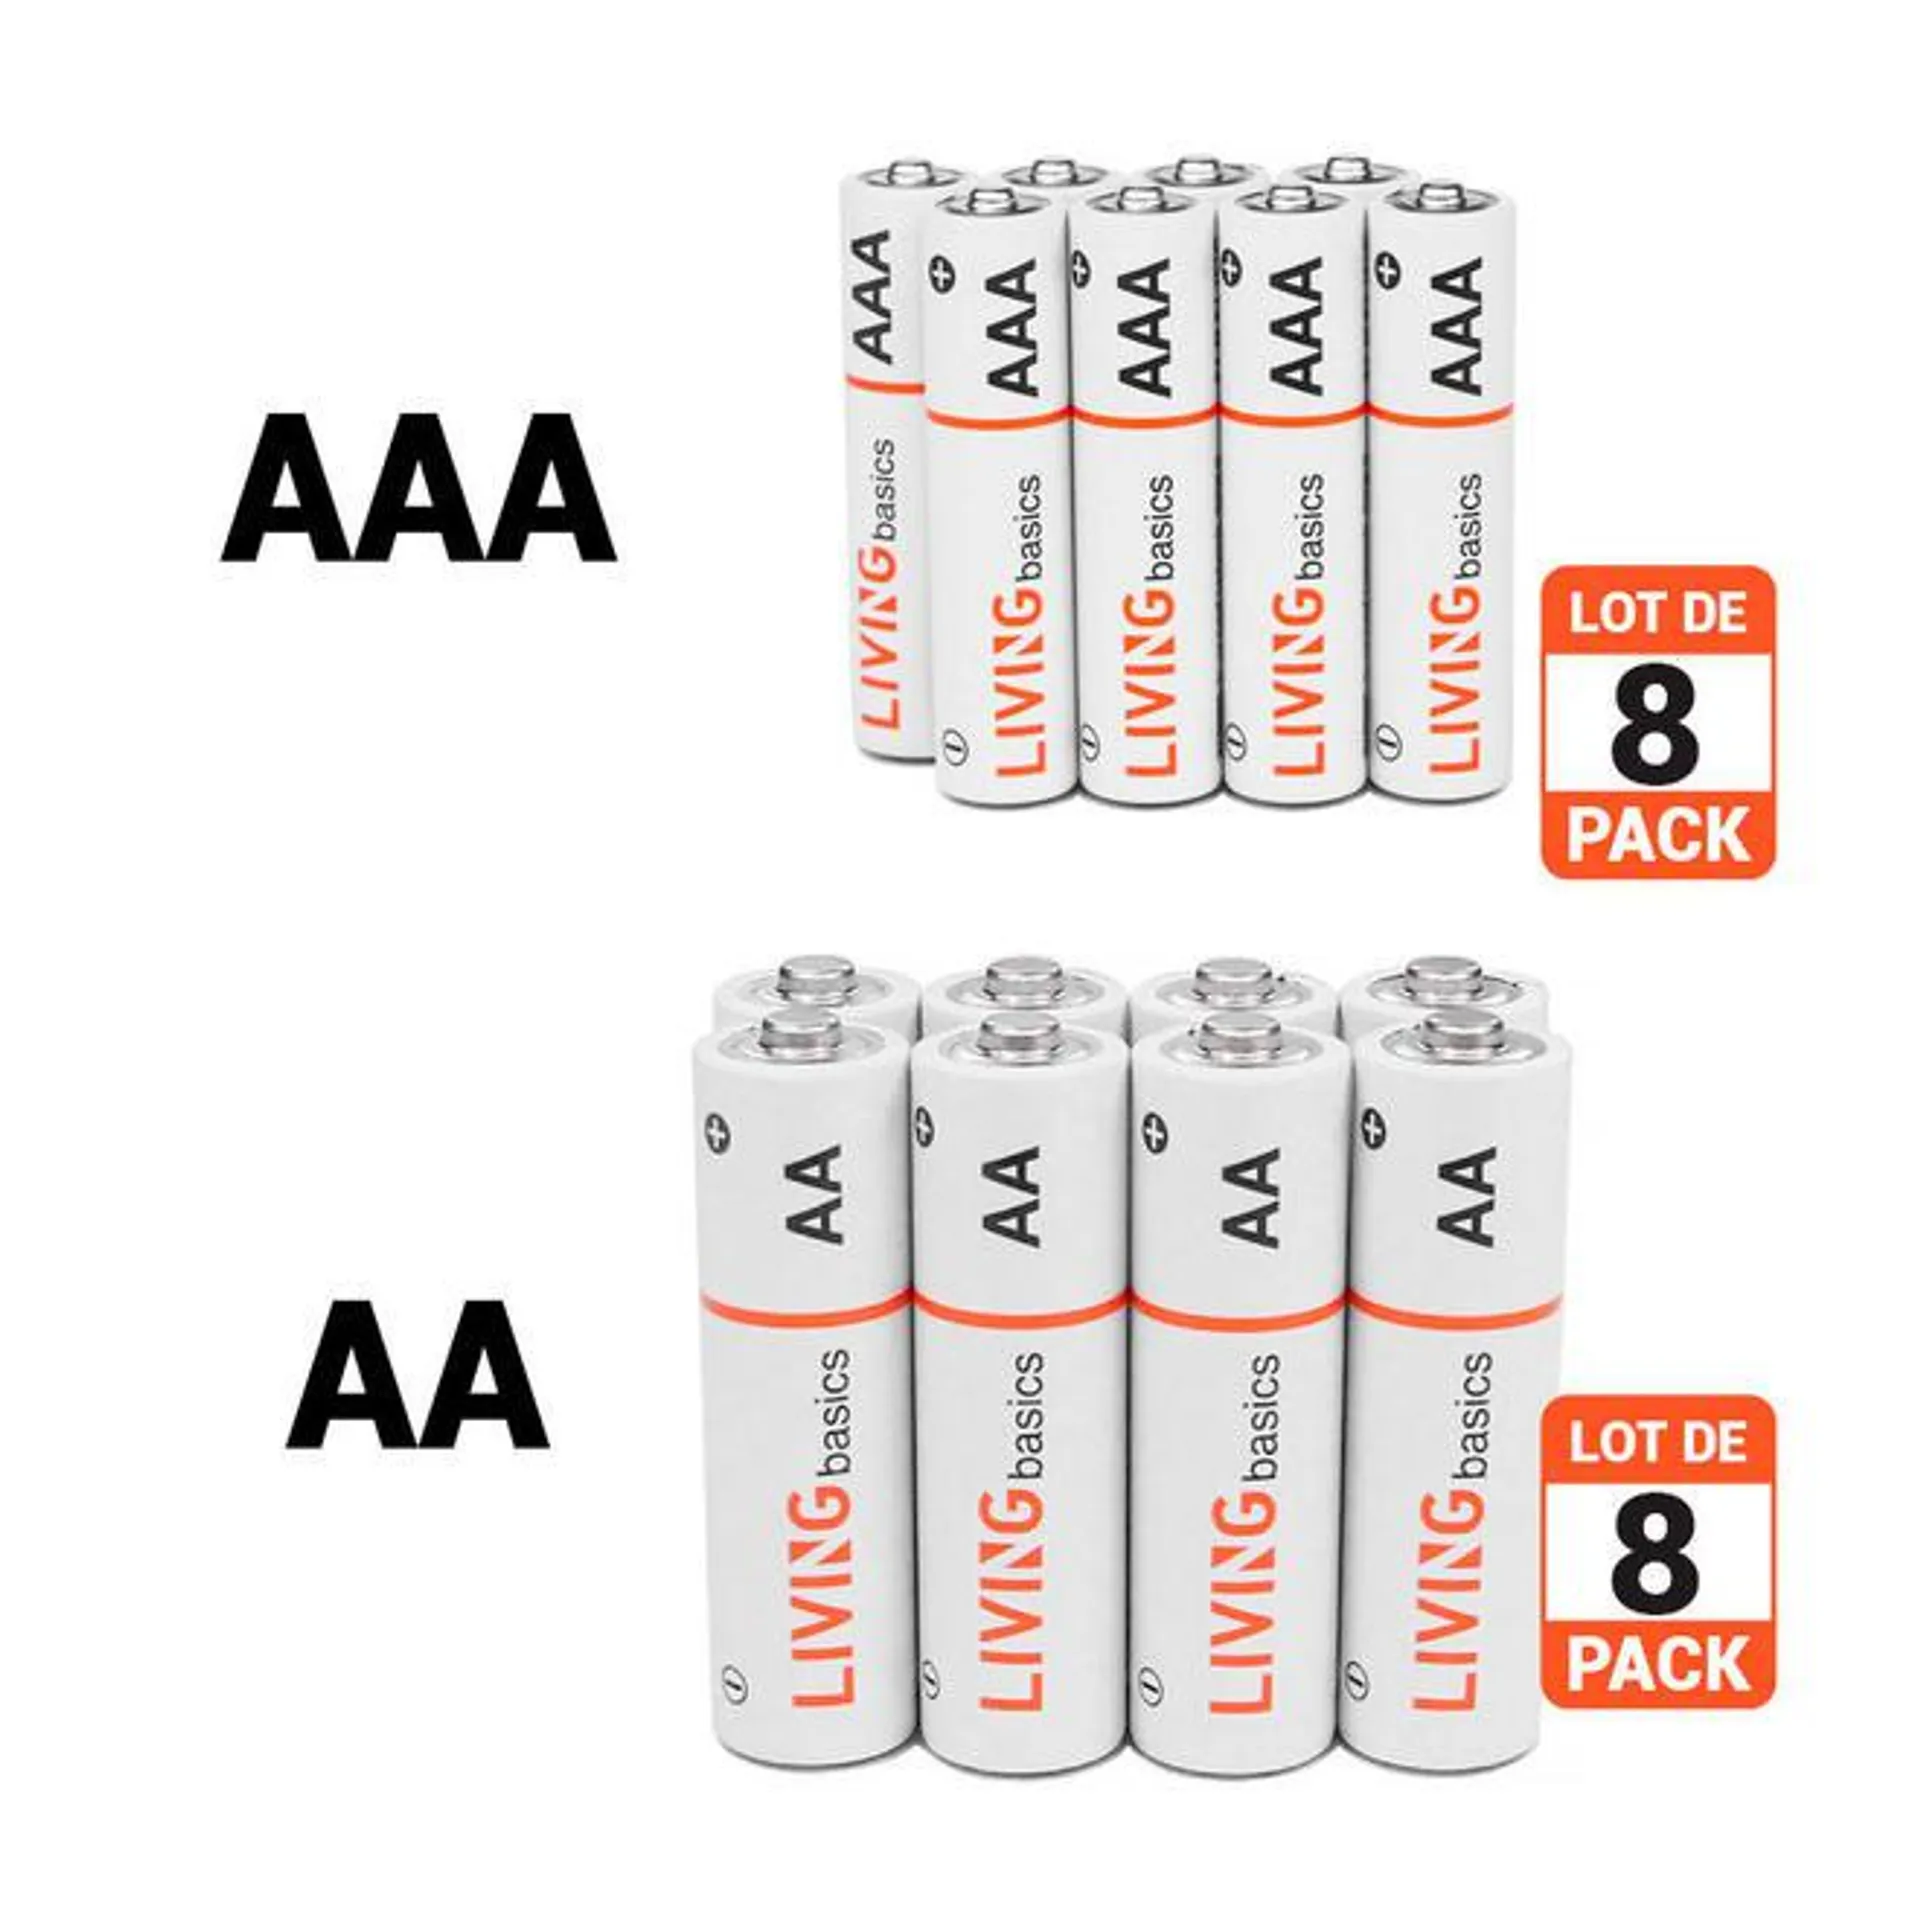 Alkaline Battery in Paper Box Packing Combo, AA 8Pcs/Pack & AAA 8Pcs/Pack - LIVINGbasics®